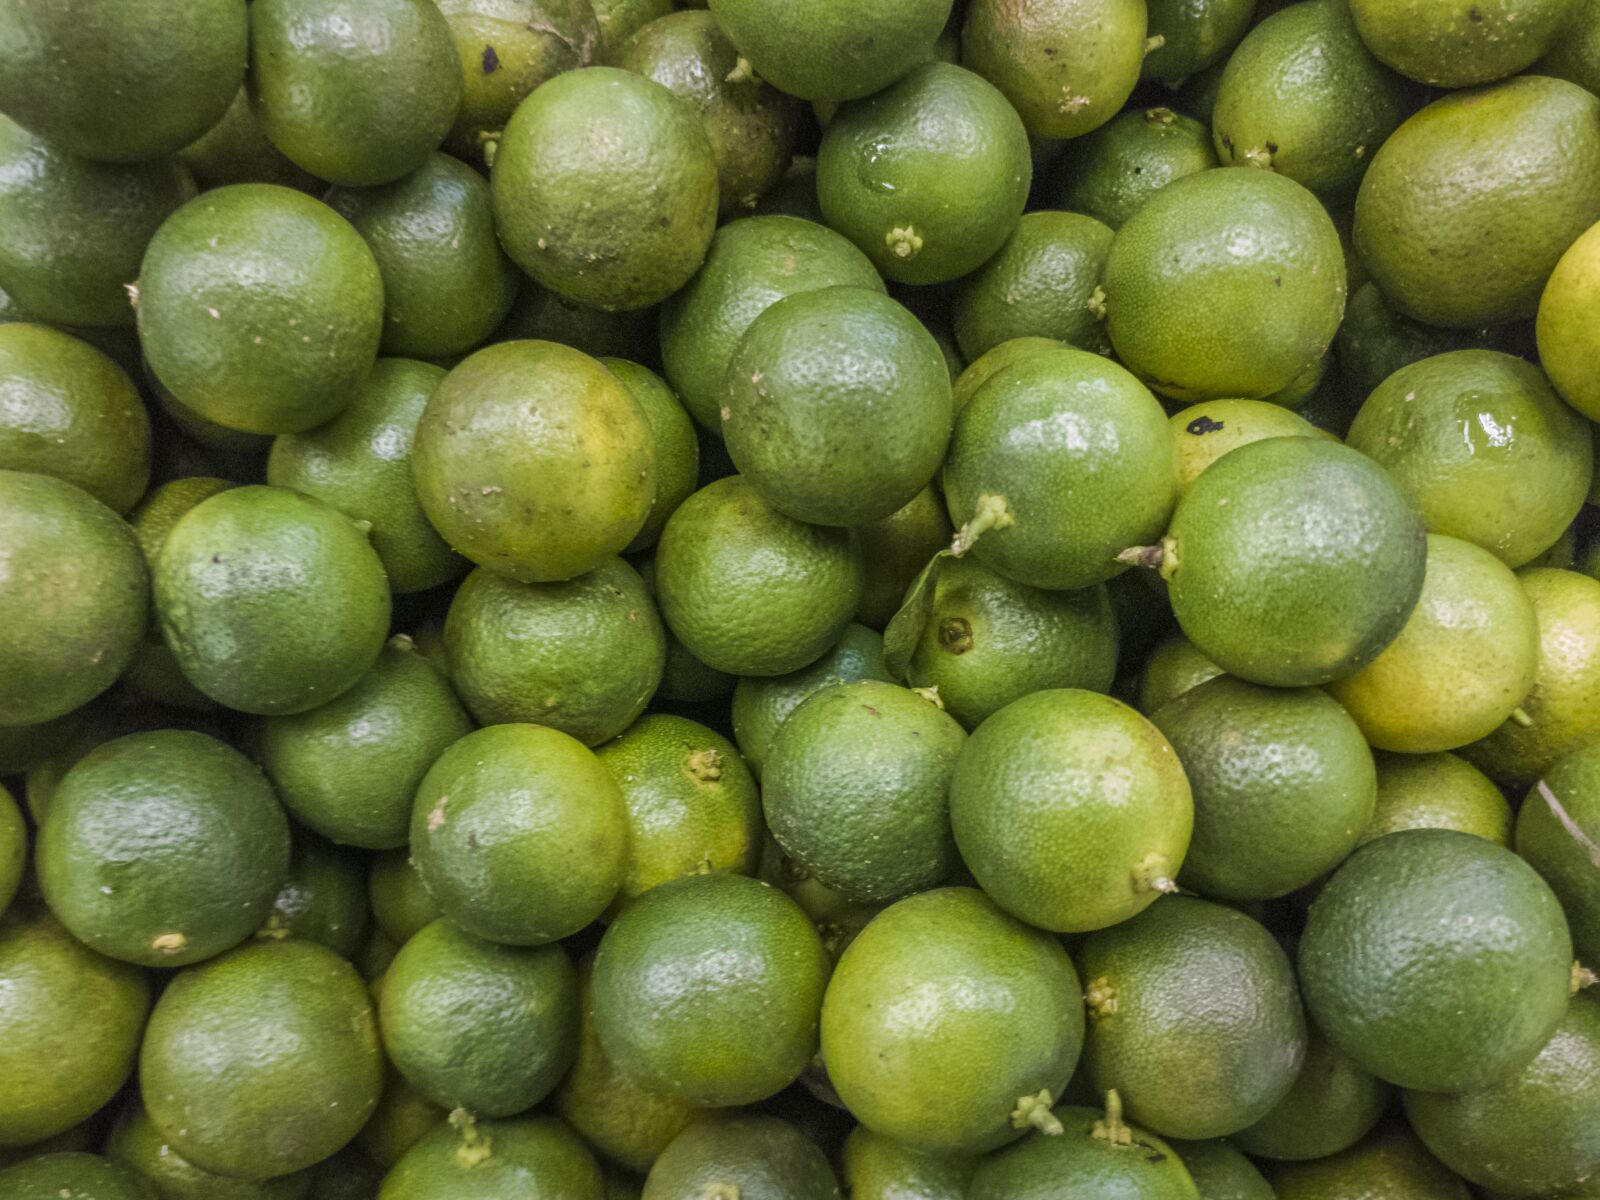 OnePlus A3000 sample photo. Lime, green, vegetable photography